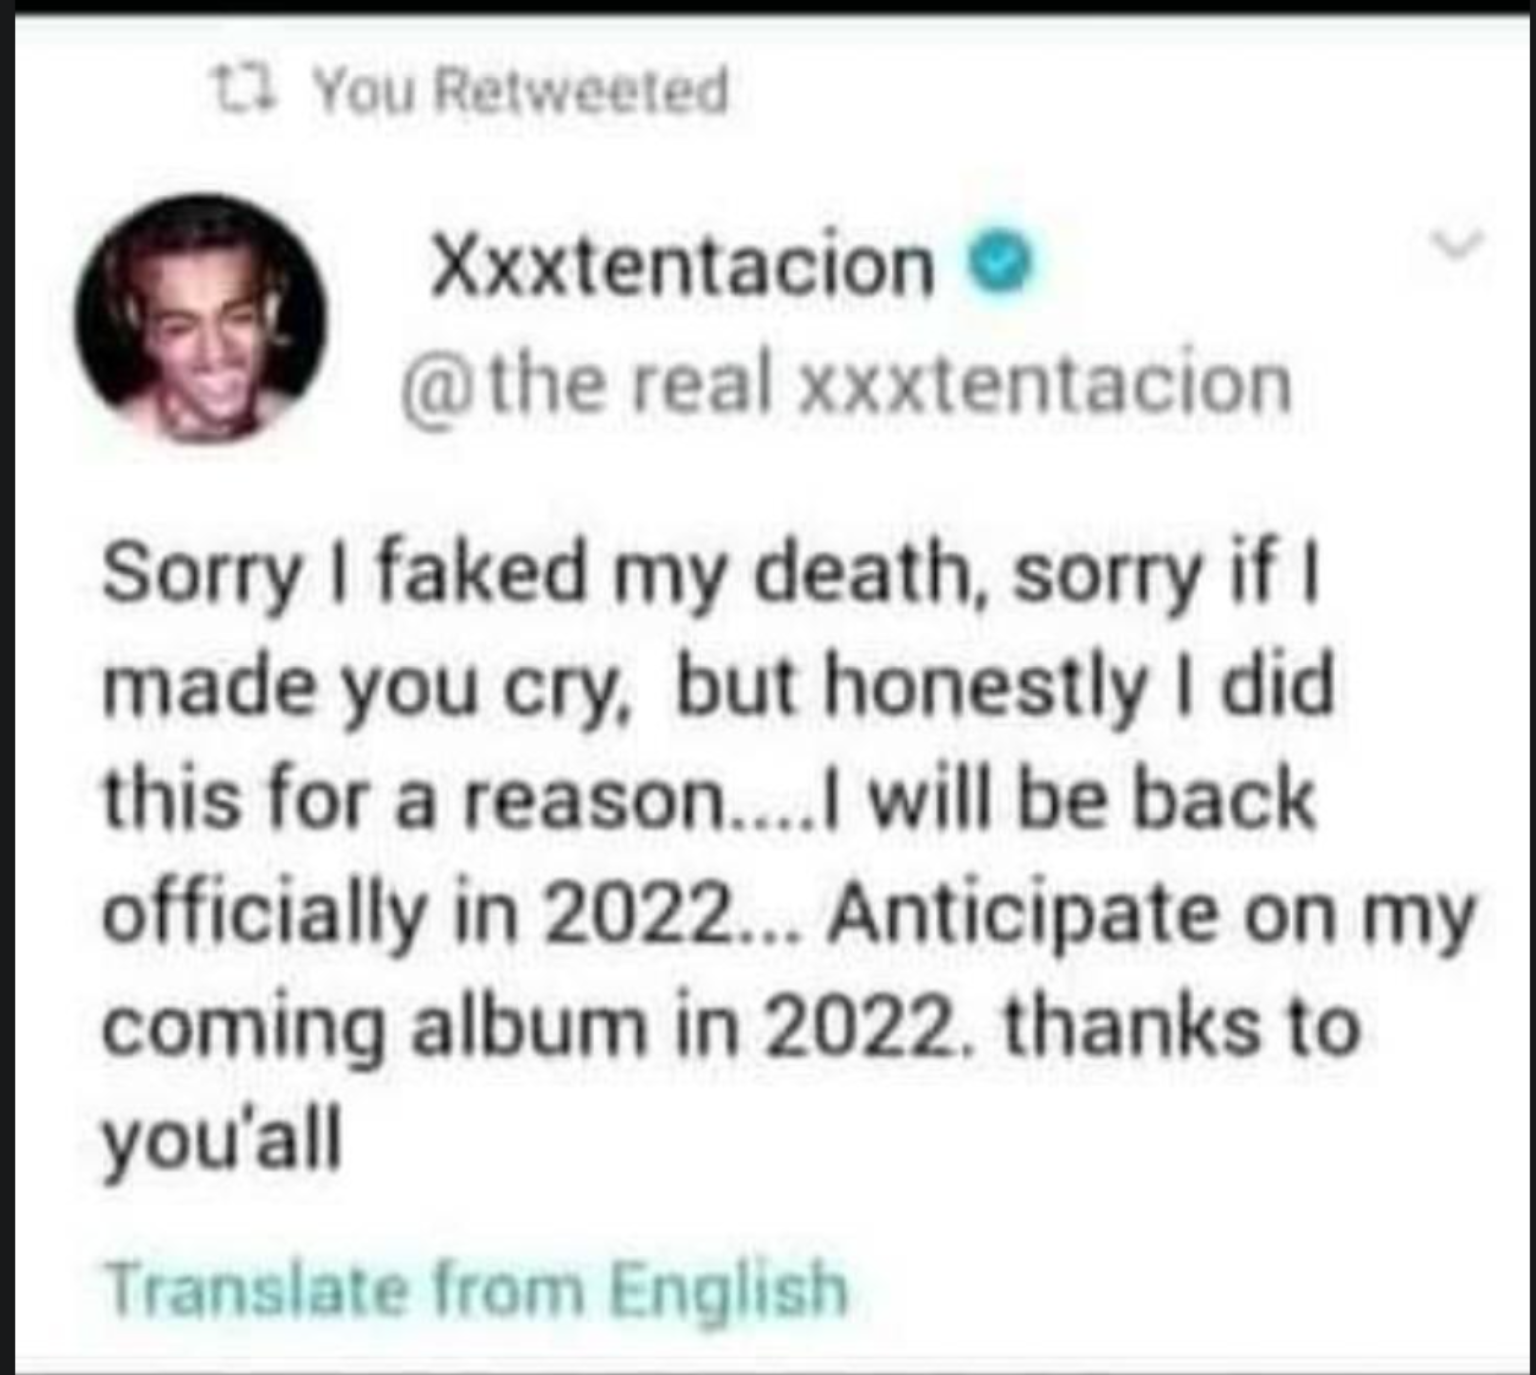 FACT CHECK Did Rapper XXXTentacion Tweet That He Faked His Death